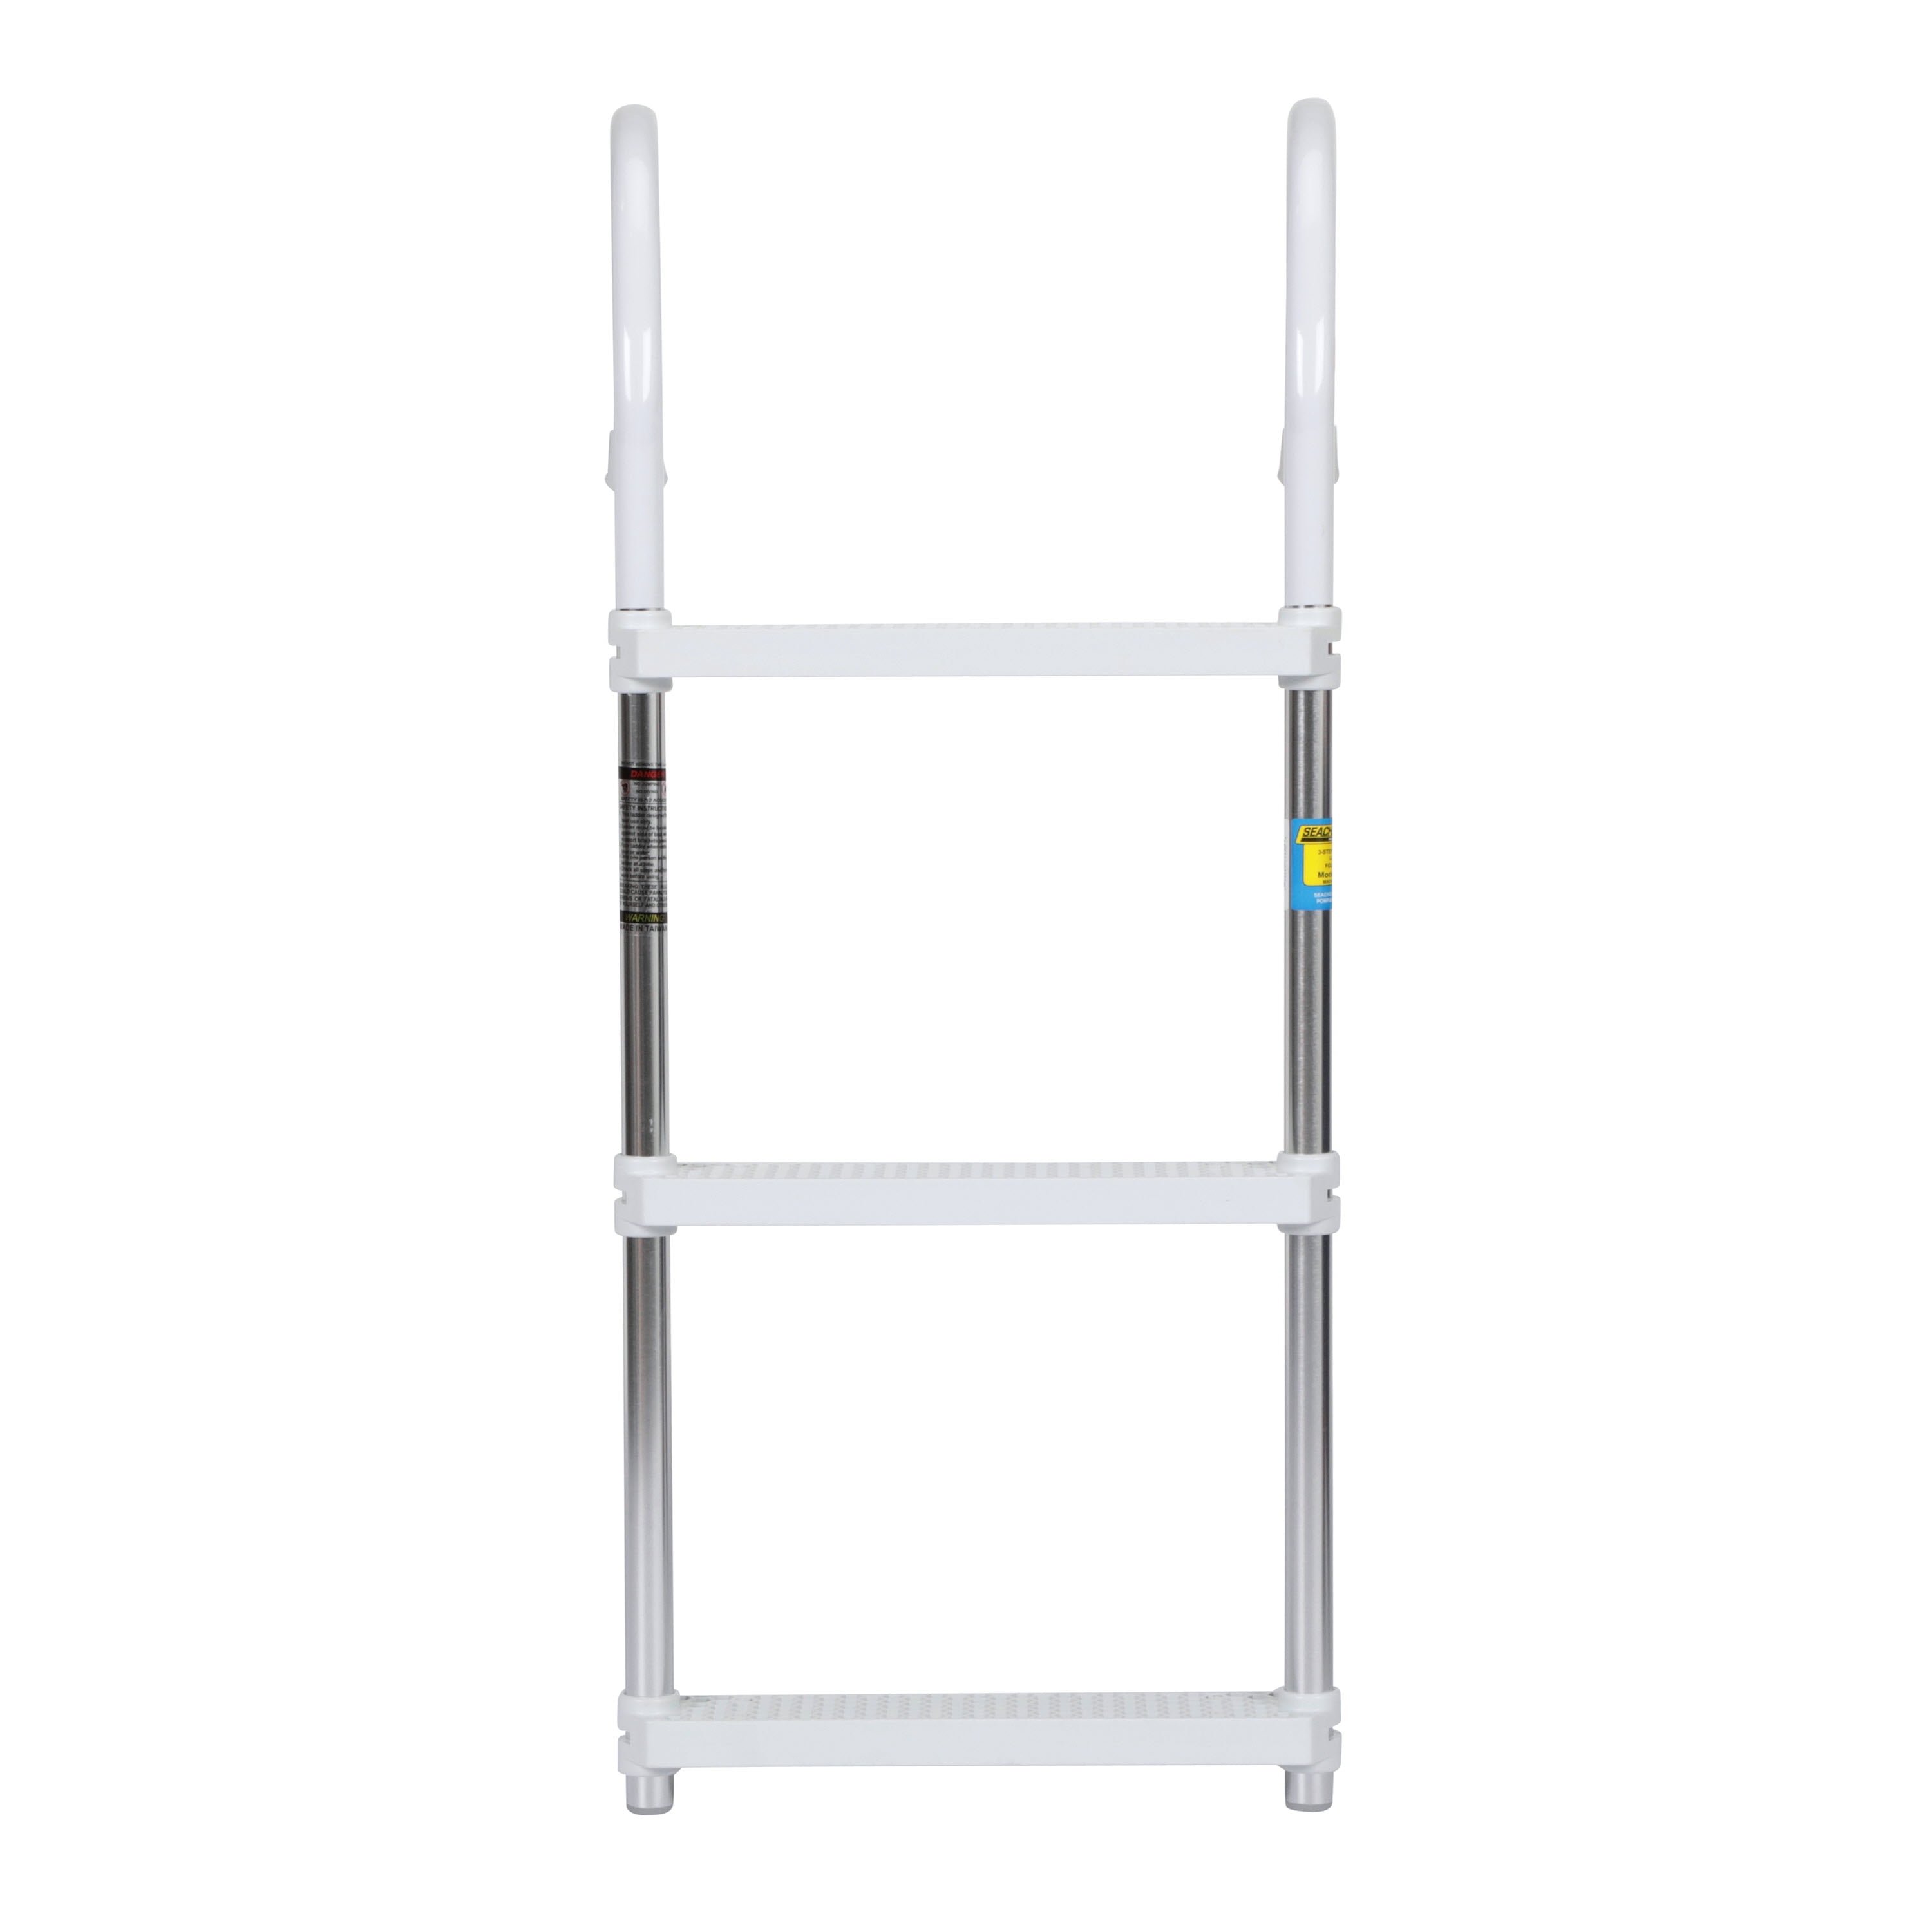 Boat Fender Ladder 3 2 4 Step Available in Blue or White 